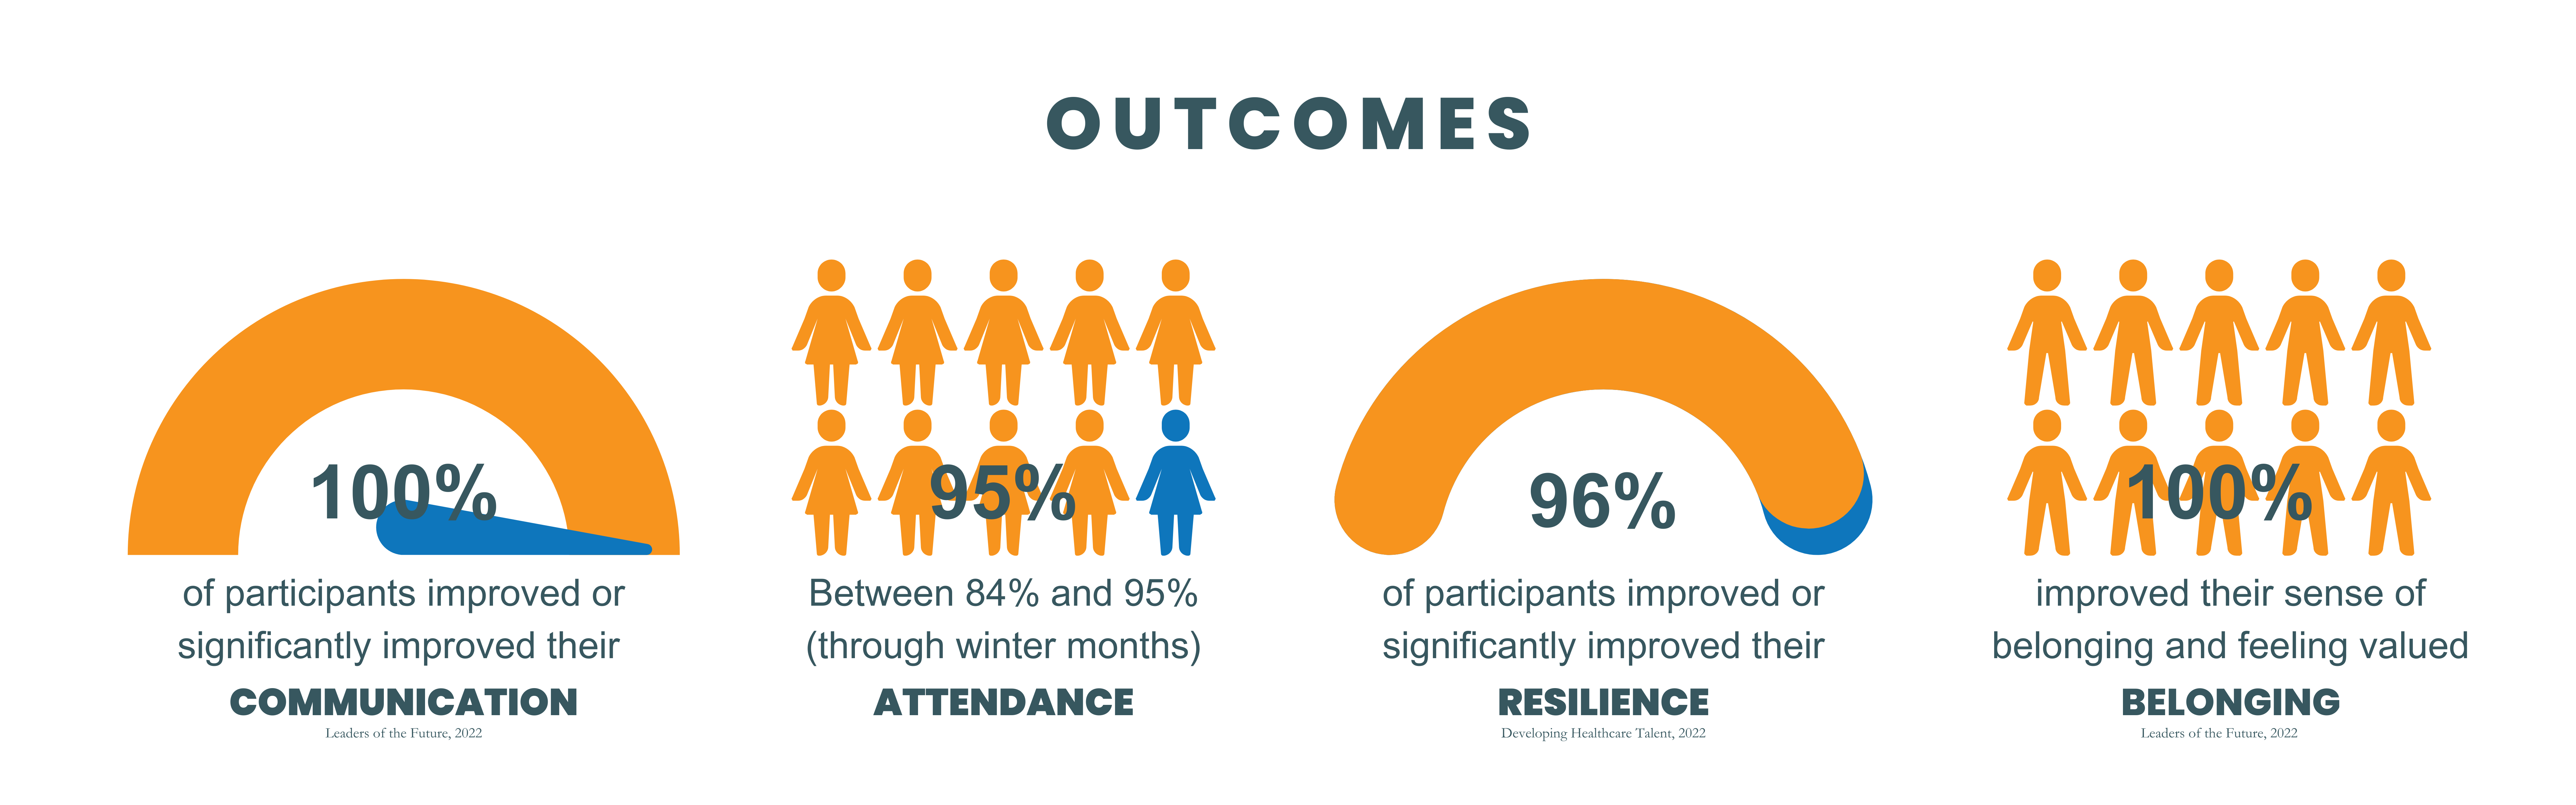 4 orange and blue charts show OUTCOMES: 100% of participants improved or significantly improved their communication; Between 84 and 95% attendance (through winter months); 96% of participants improved or significantly improved their resilience; 100% of participants improved their sense of value and belonging